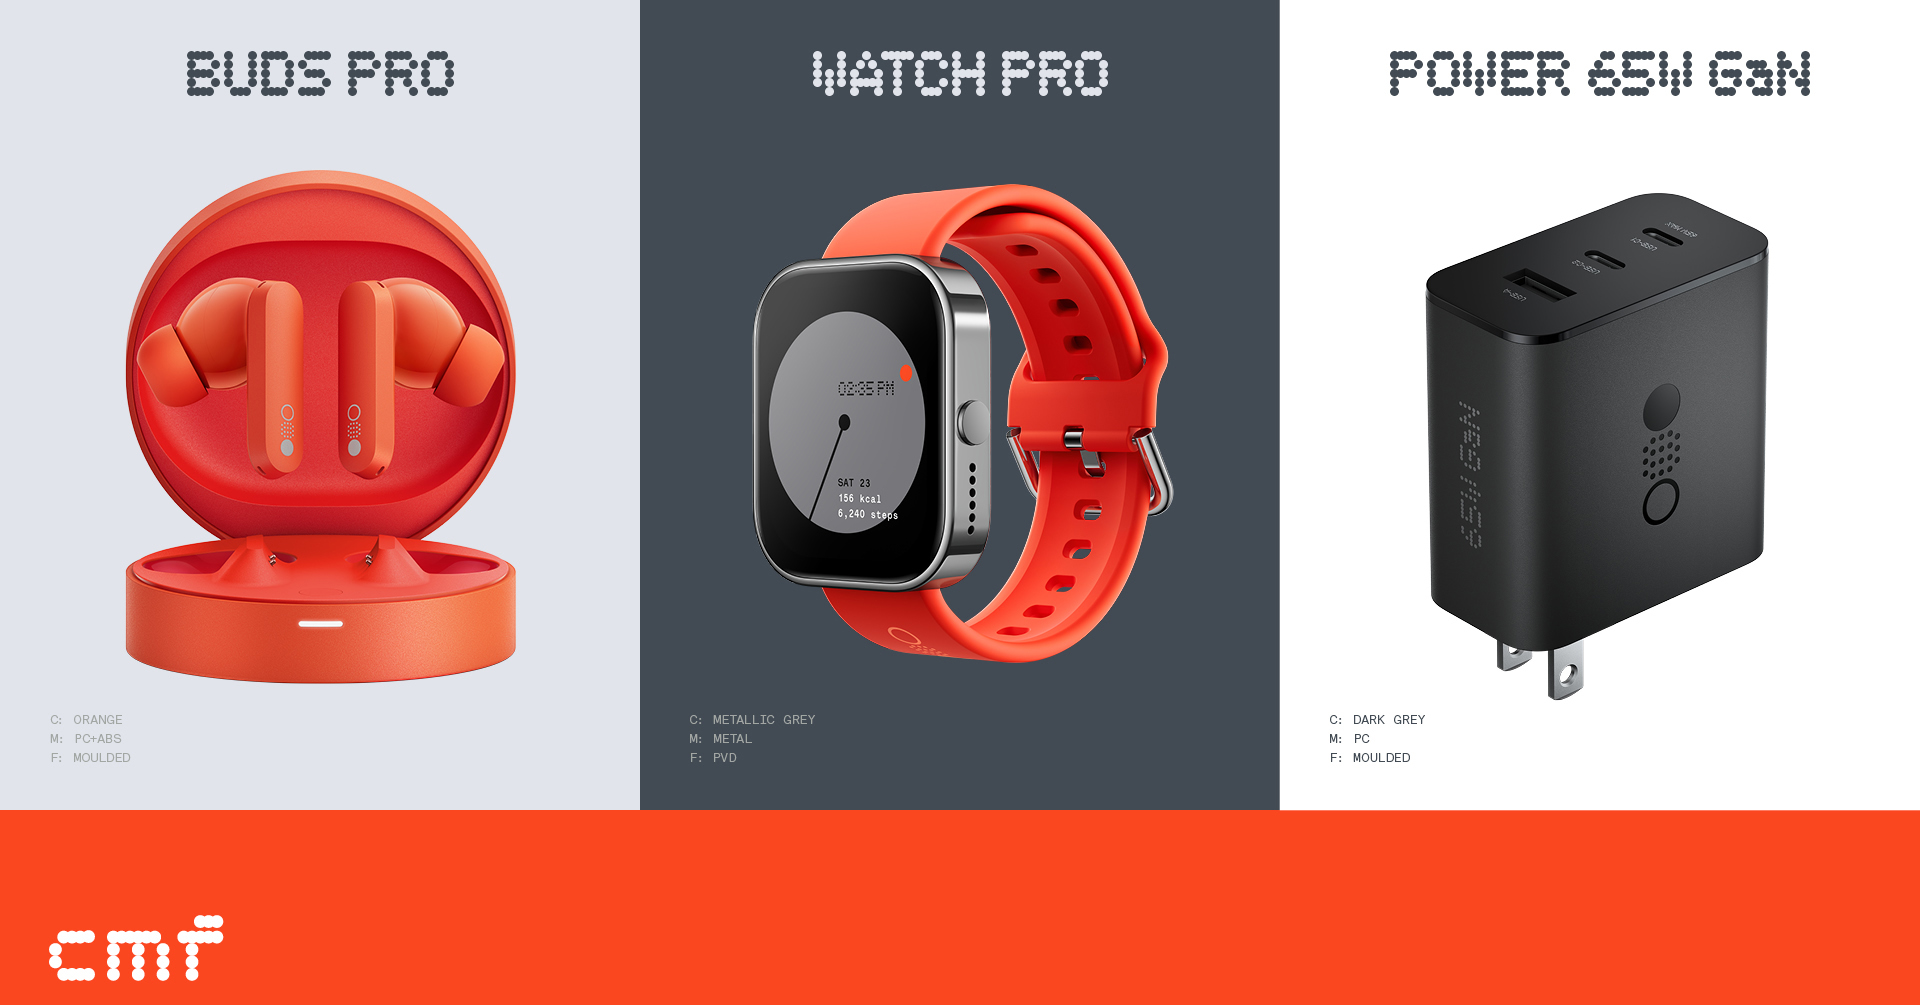 CMF Watch Pro: Budget smartwatch with standard features, great battery life